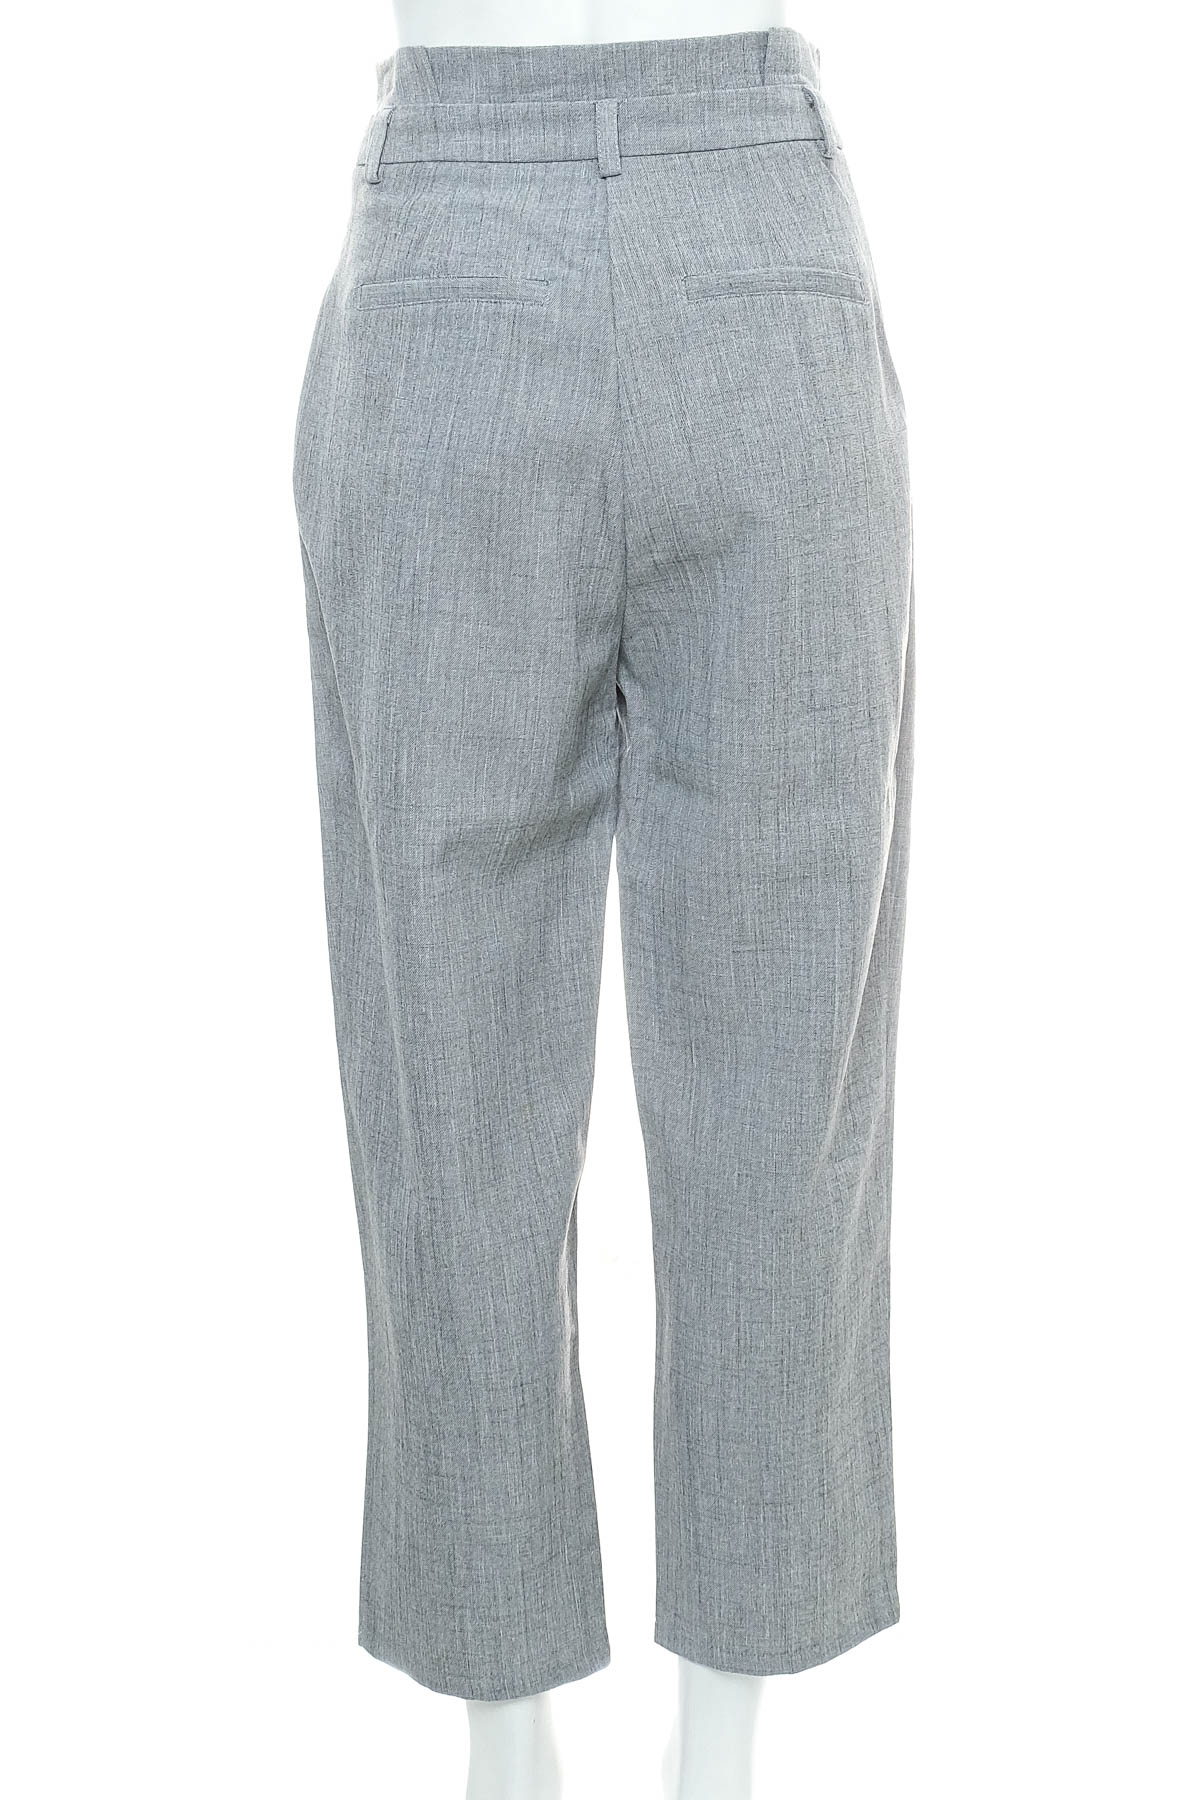 Women's trousers - Alle Hues - 1